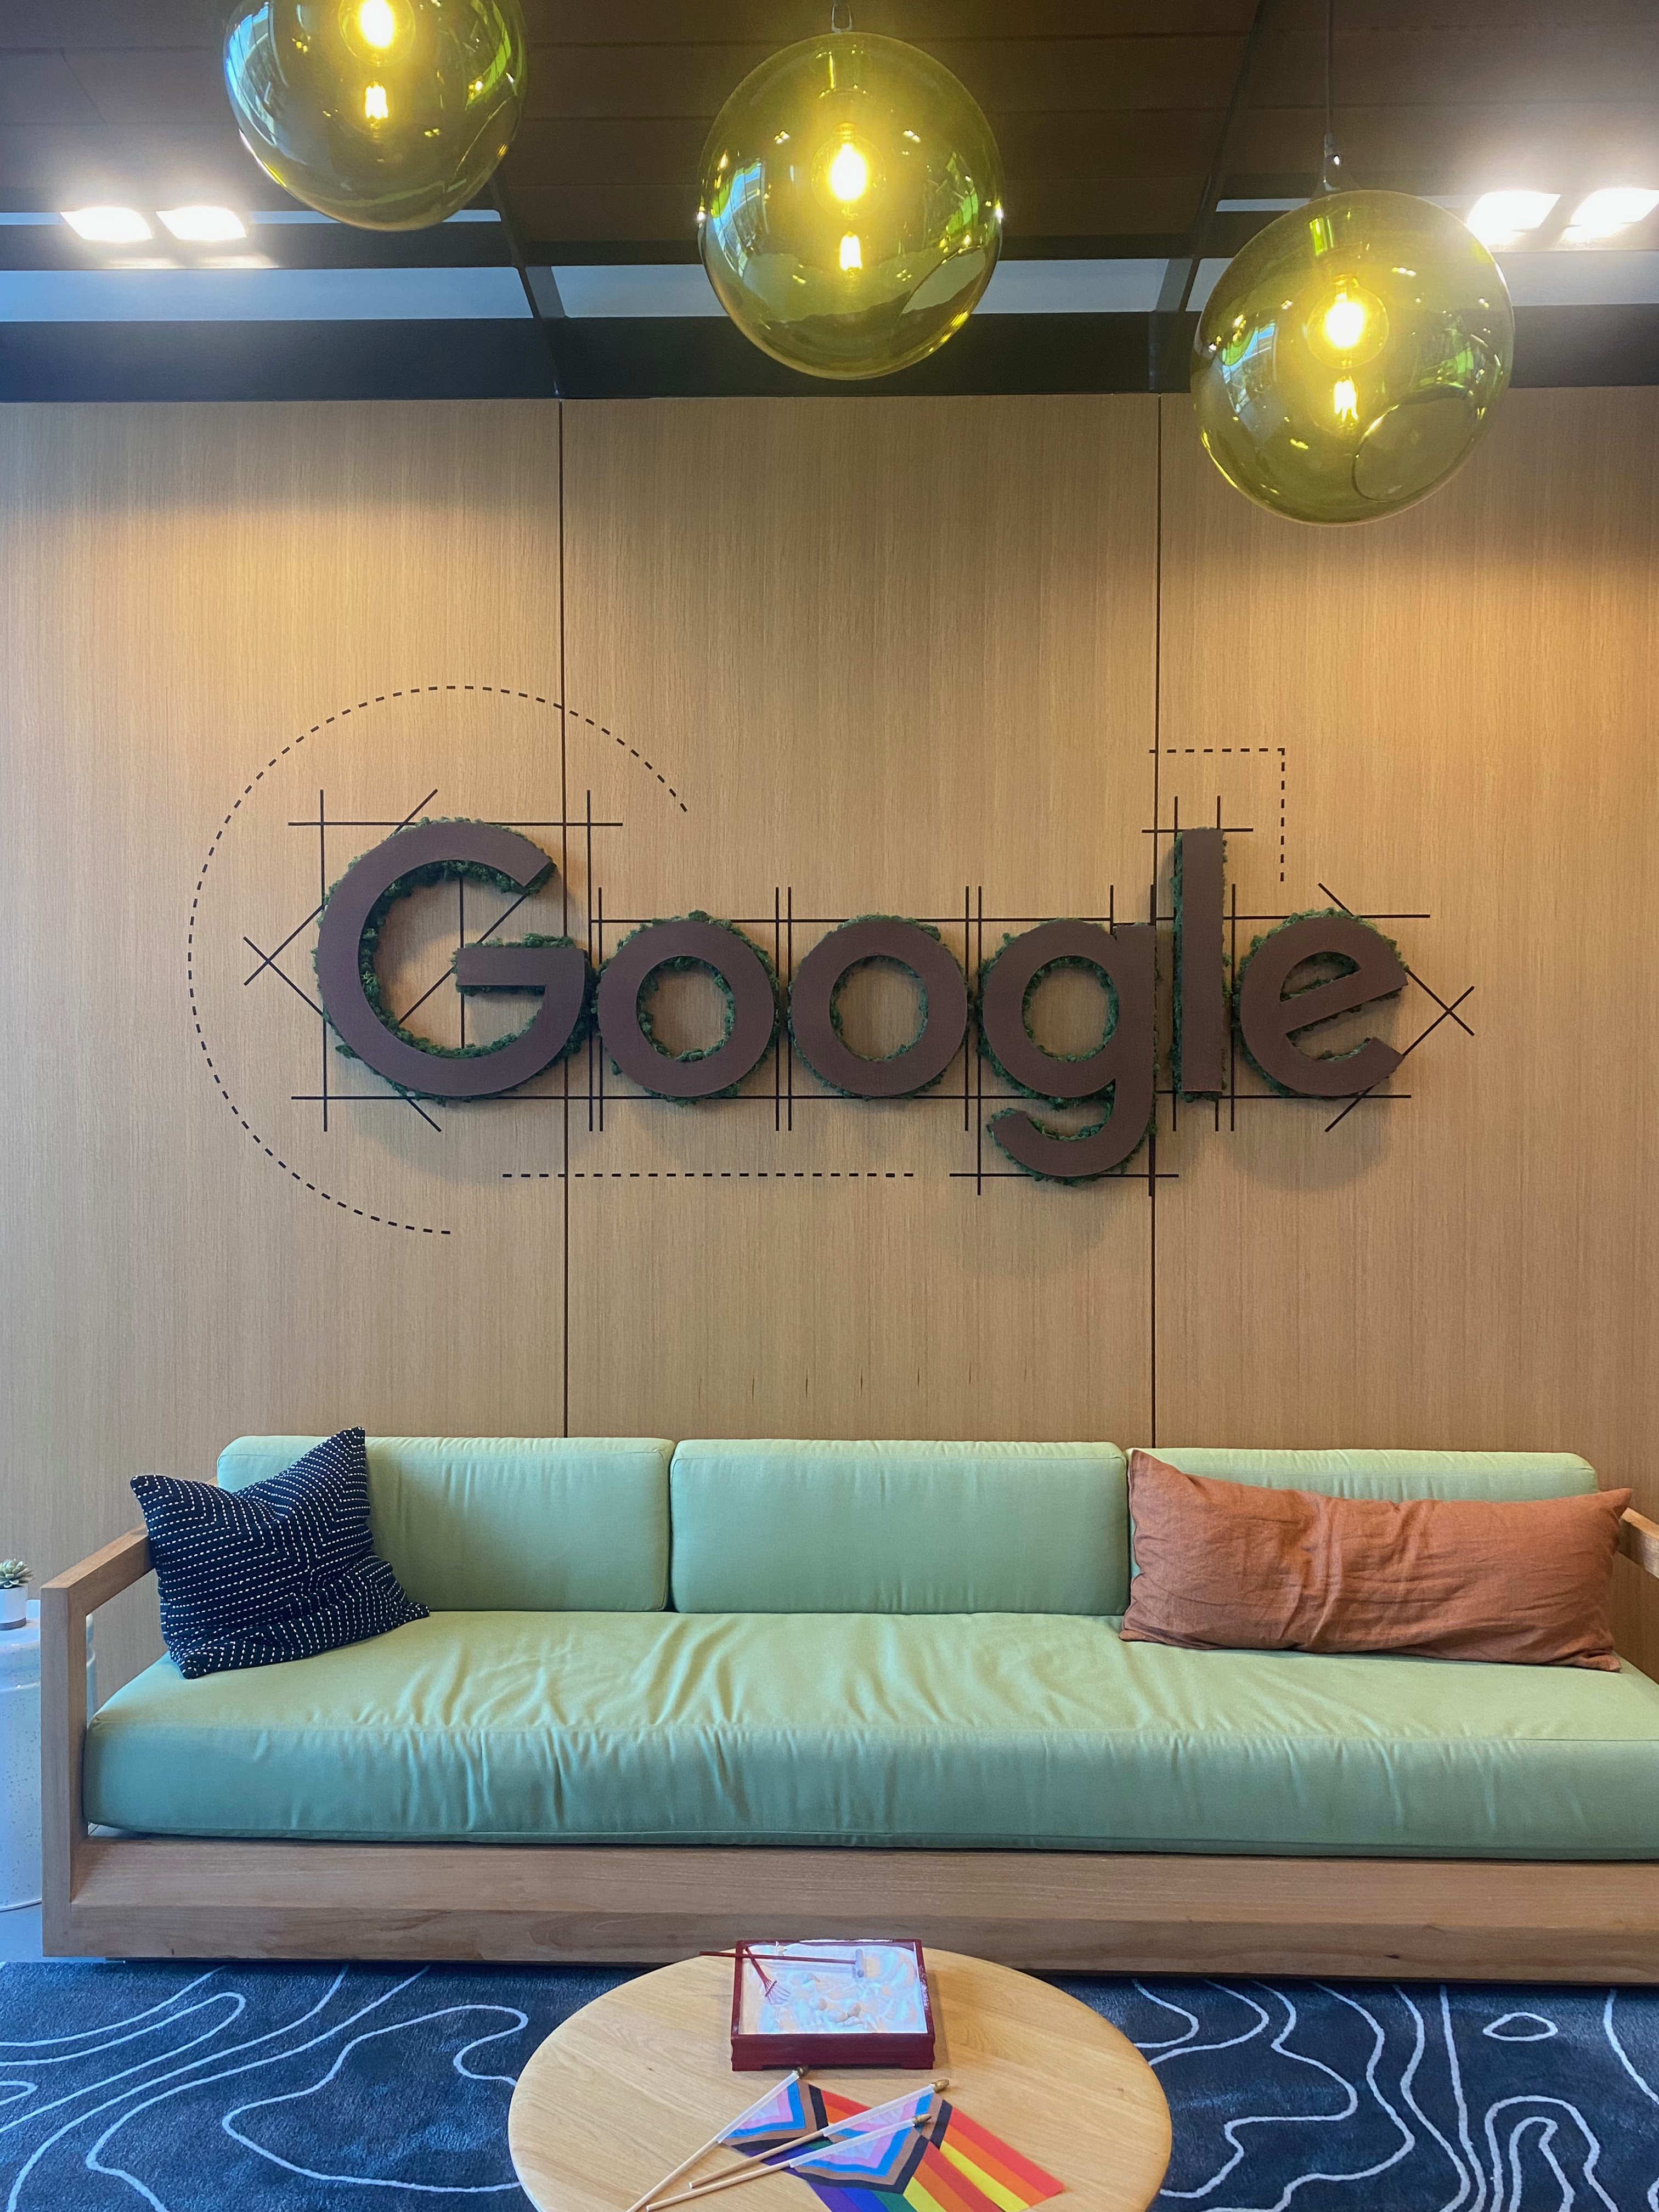 ICYMI: August Networking Before 9 powered by Google